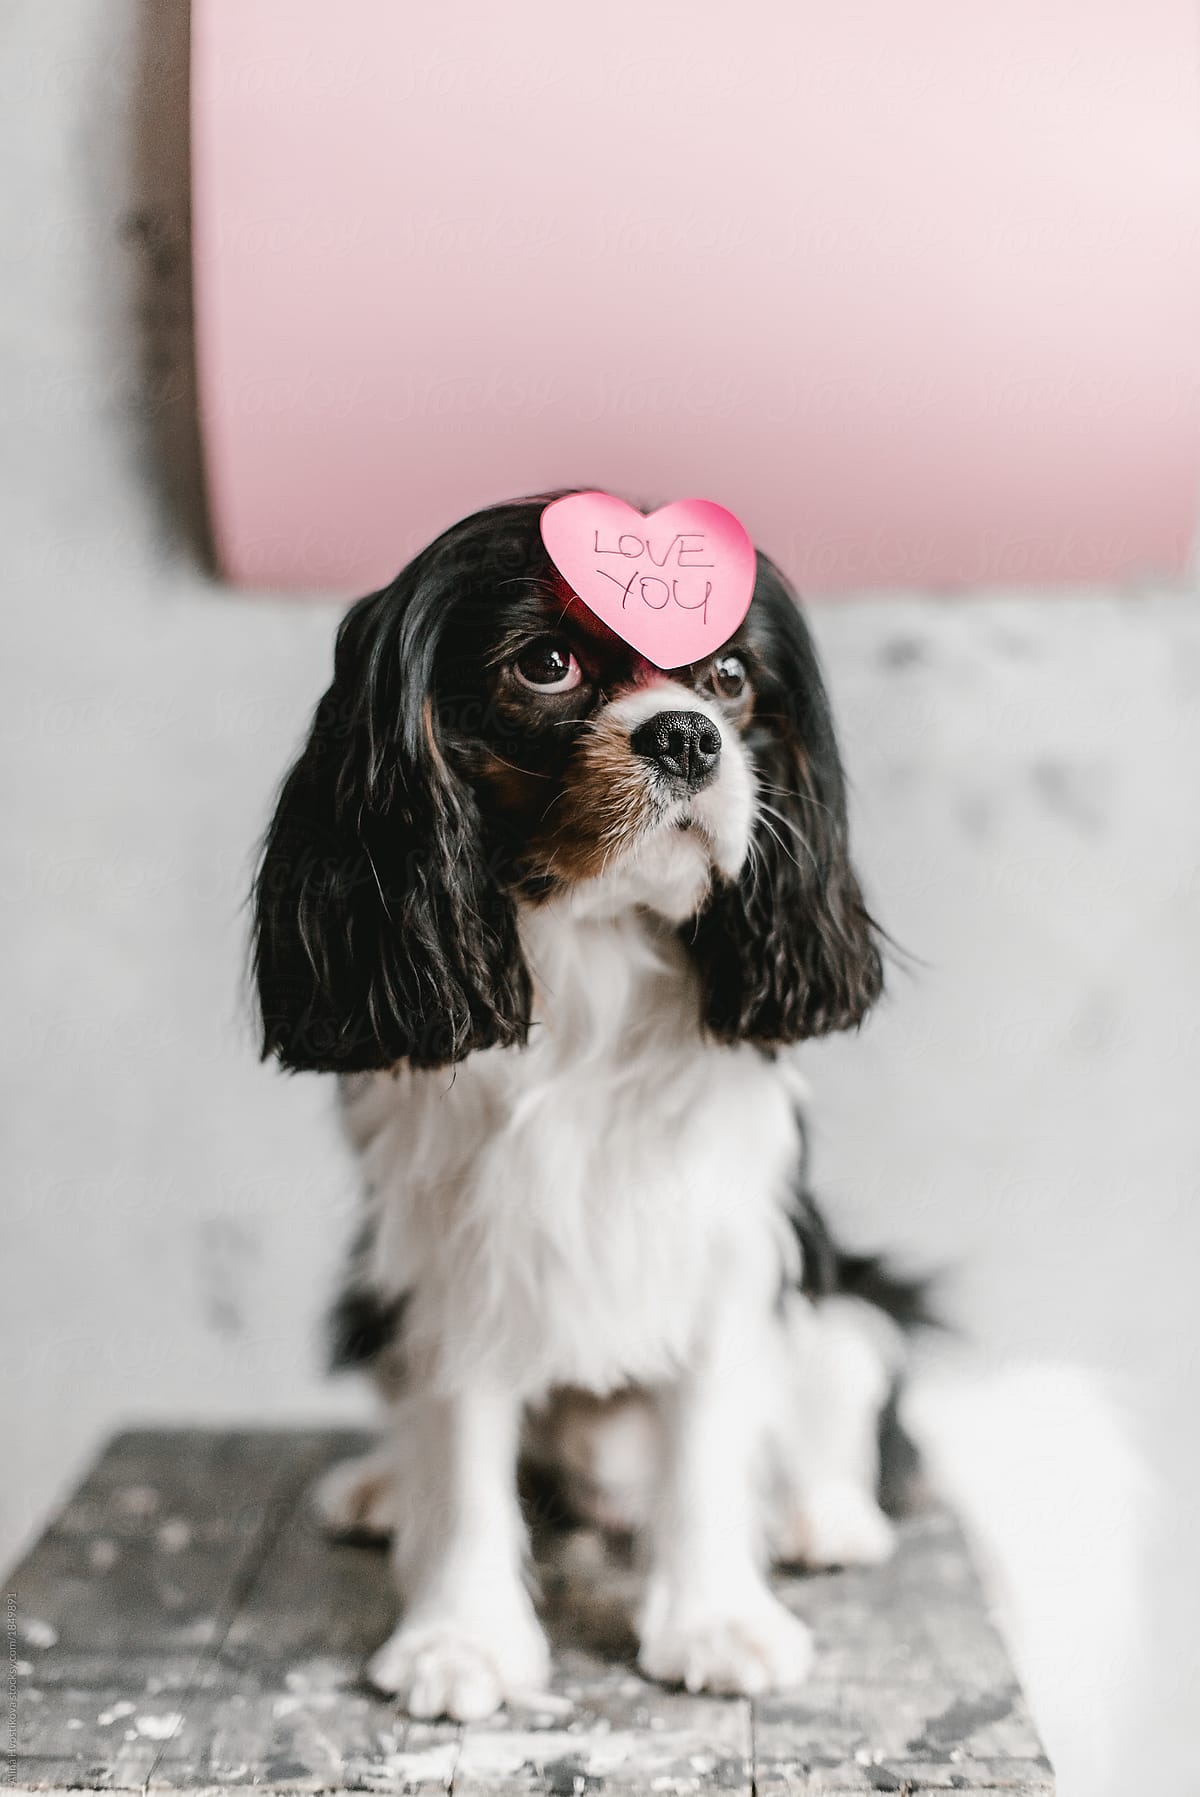 Charming dog with sticker saying Love you